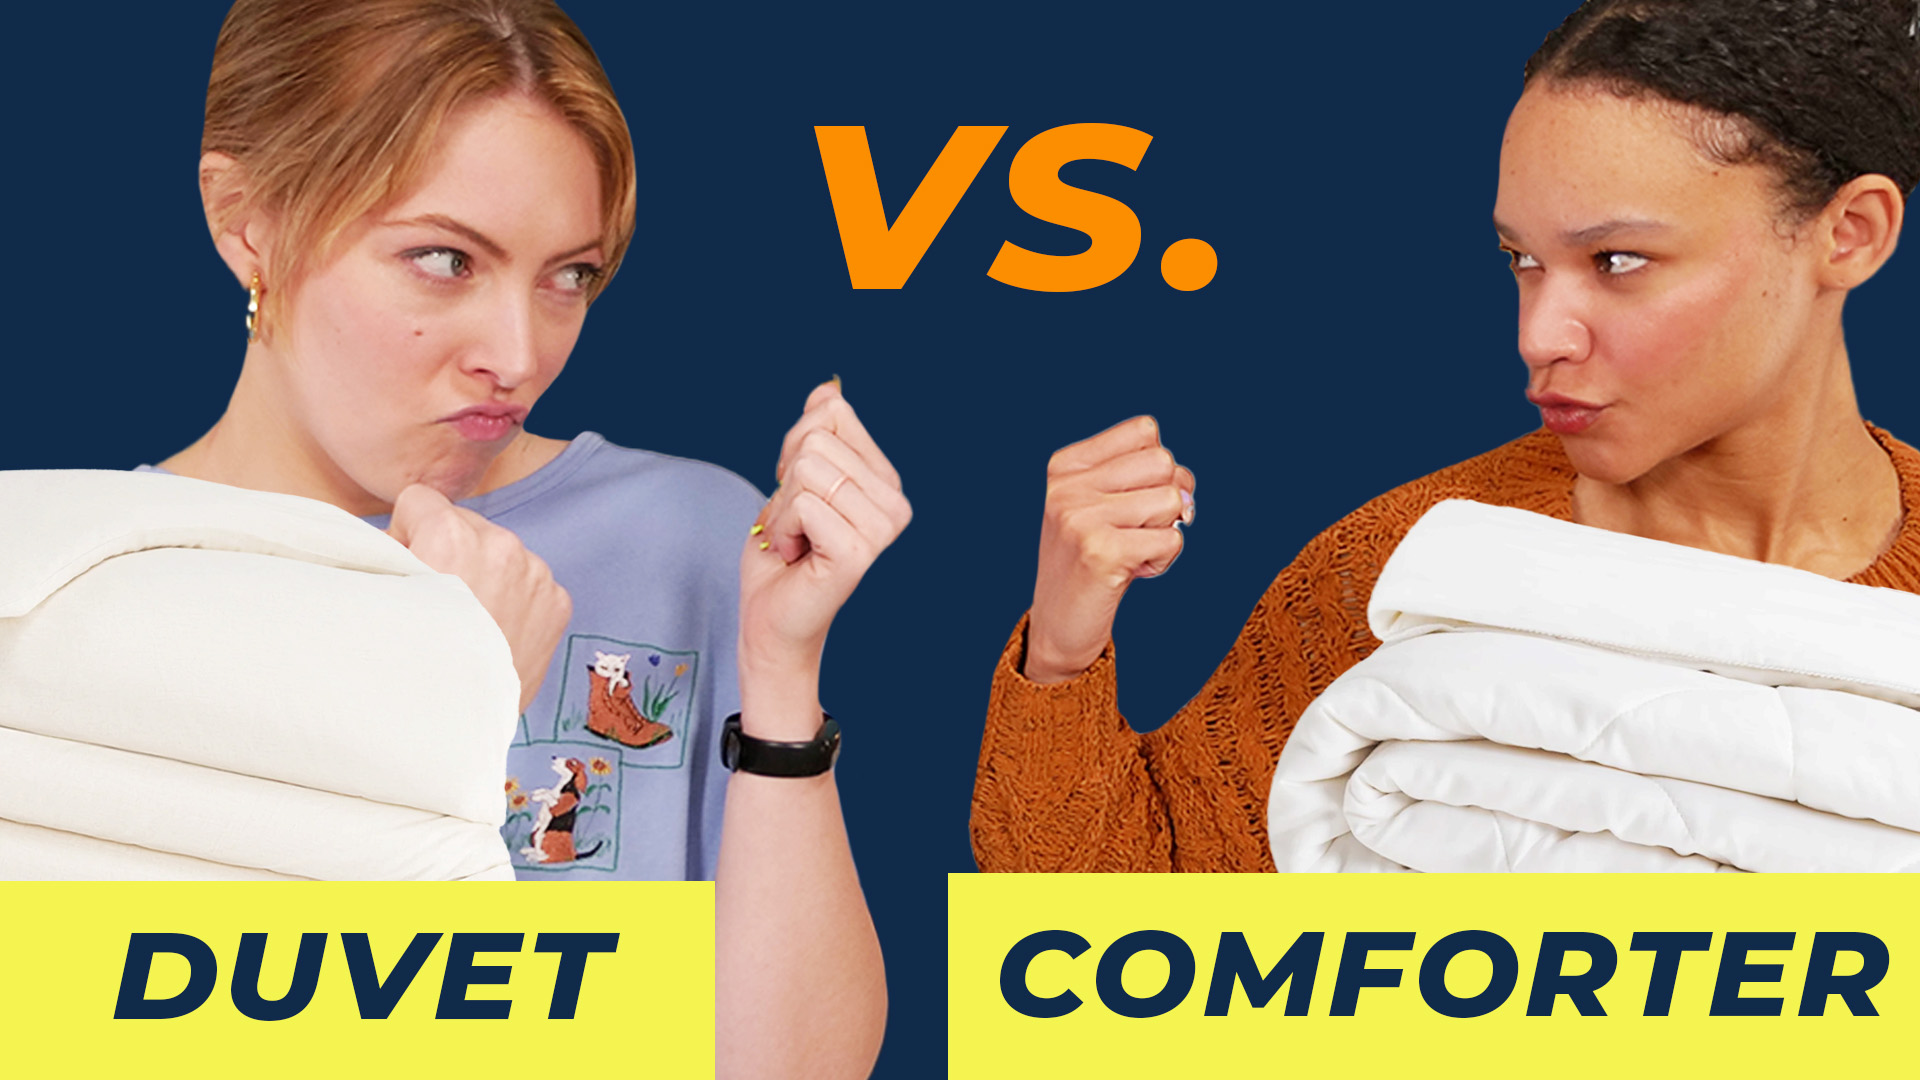 Duvet vs. Comforter: Which One Should You Get?